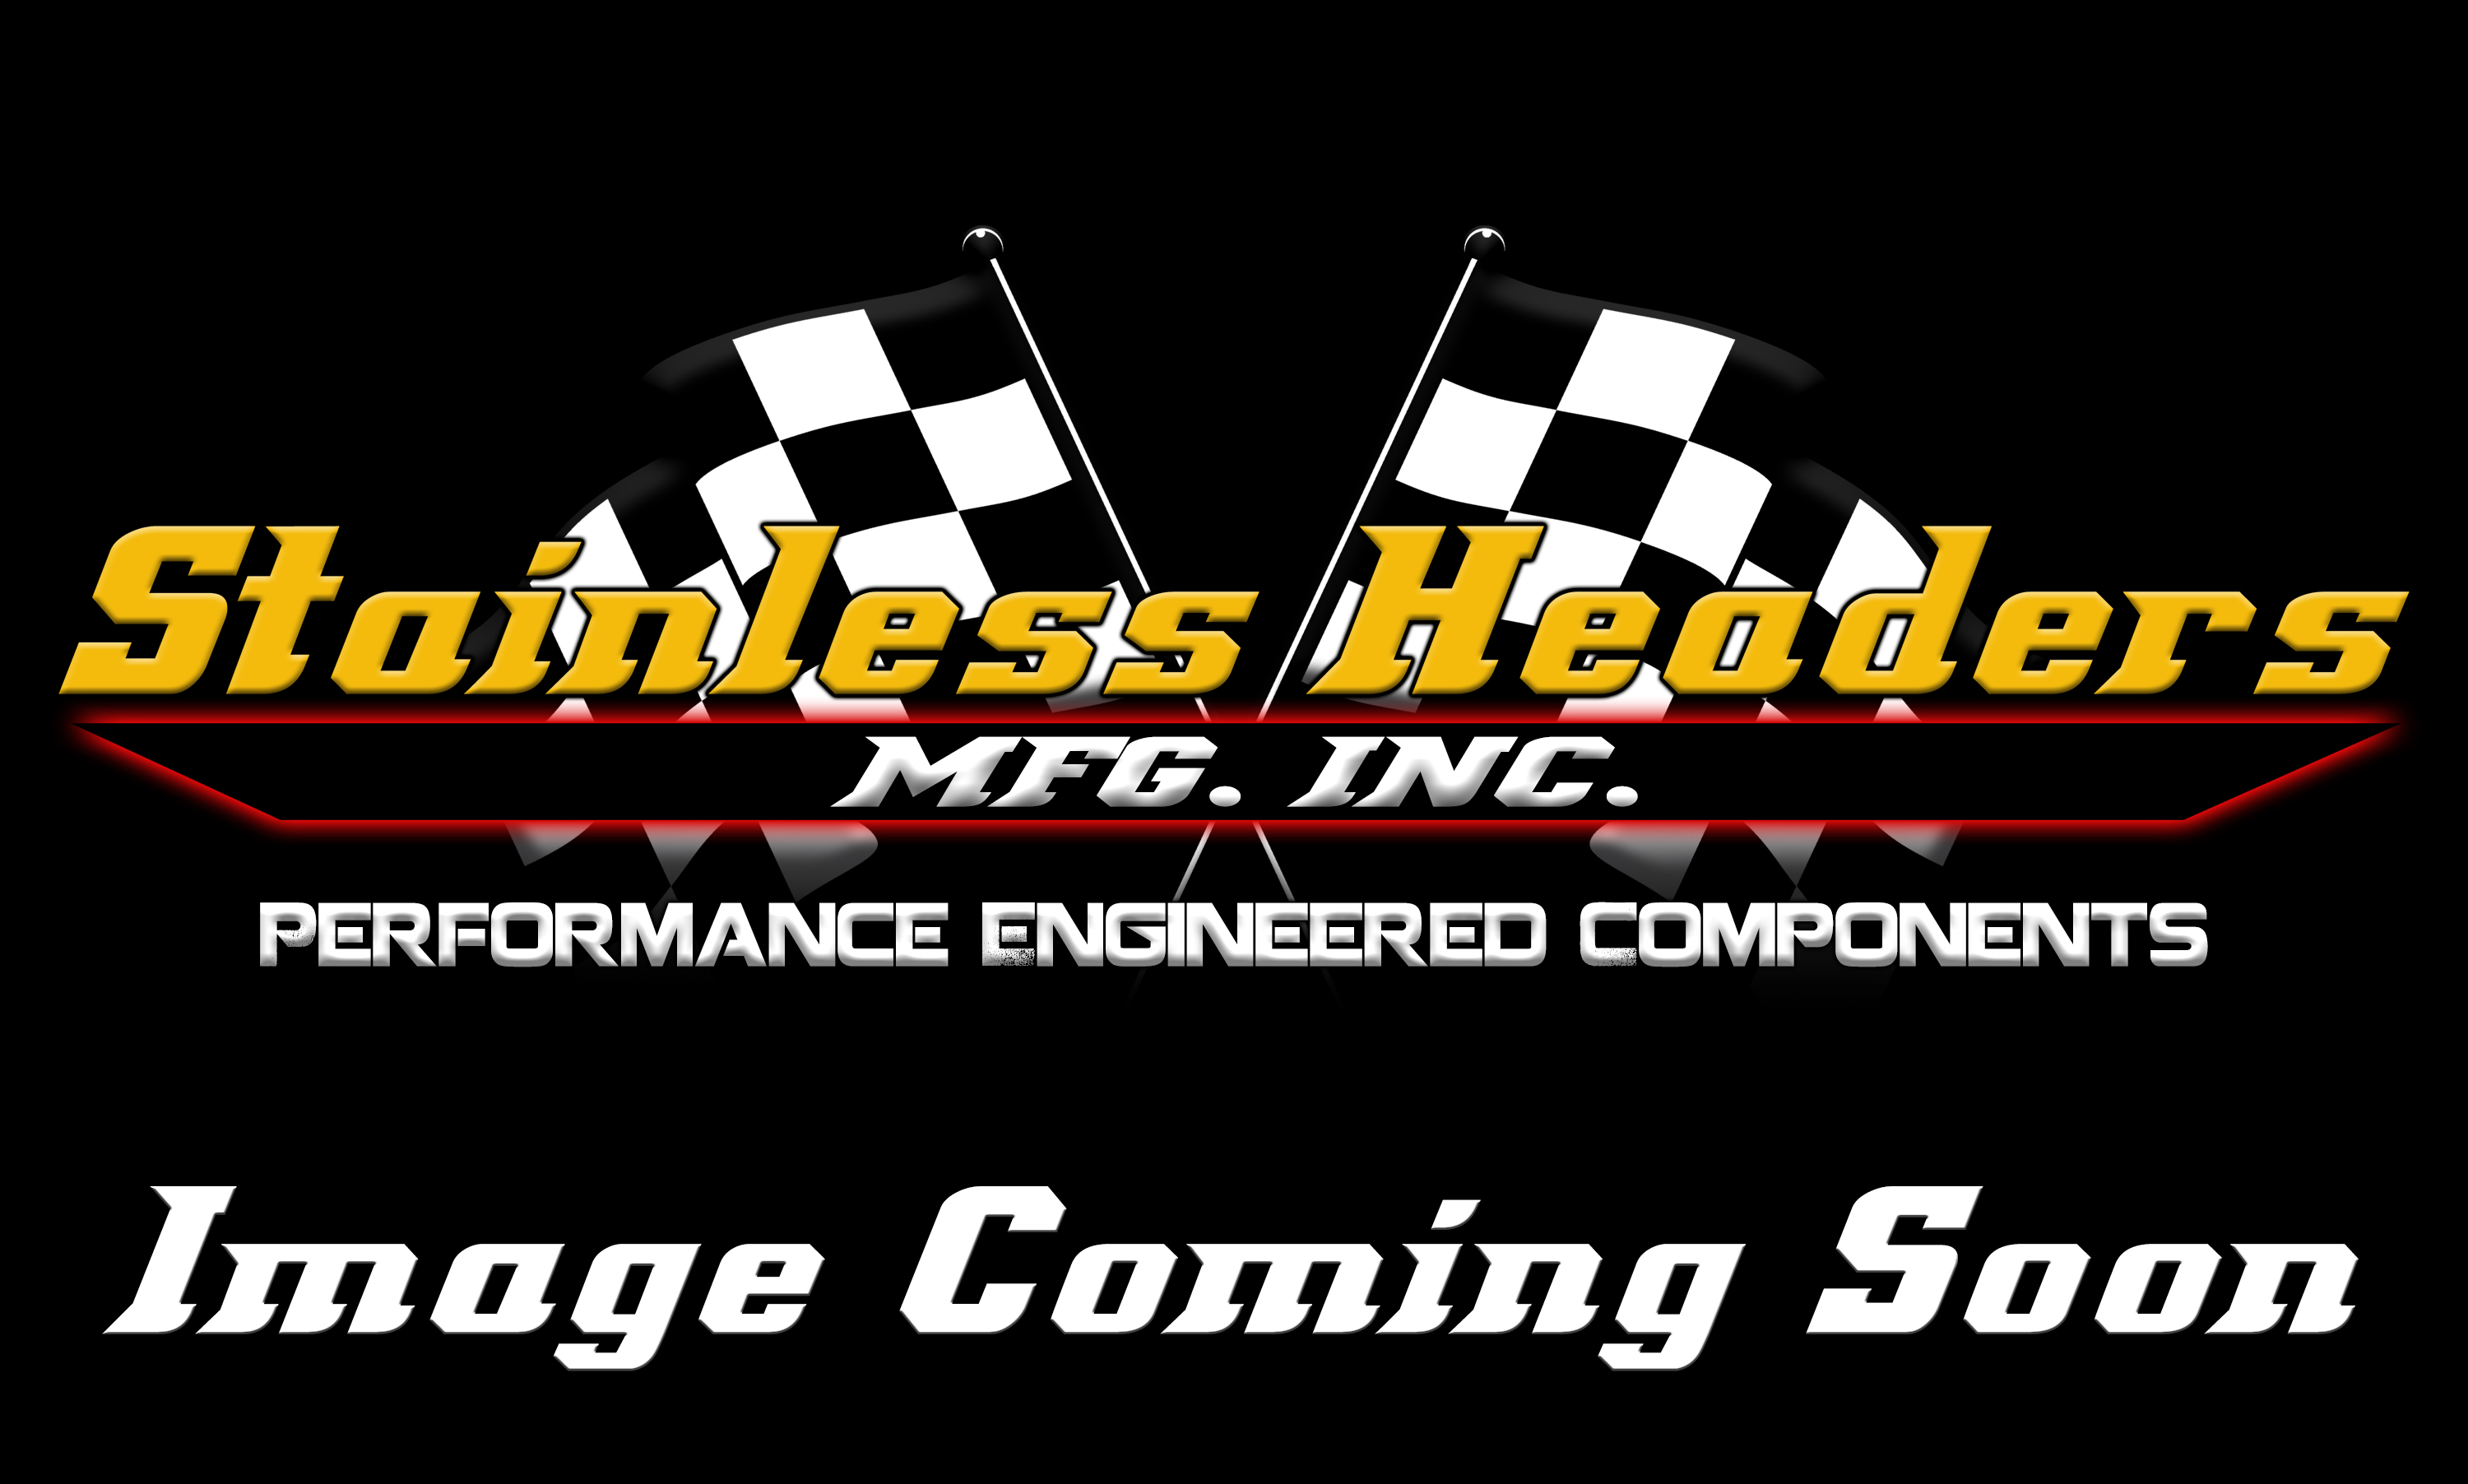 CompTurbo Technologies - CTR4828R-8890 Mid Frame Oil Lubricated 2.0 Turbocharger (1850 HP)